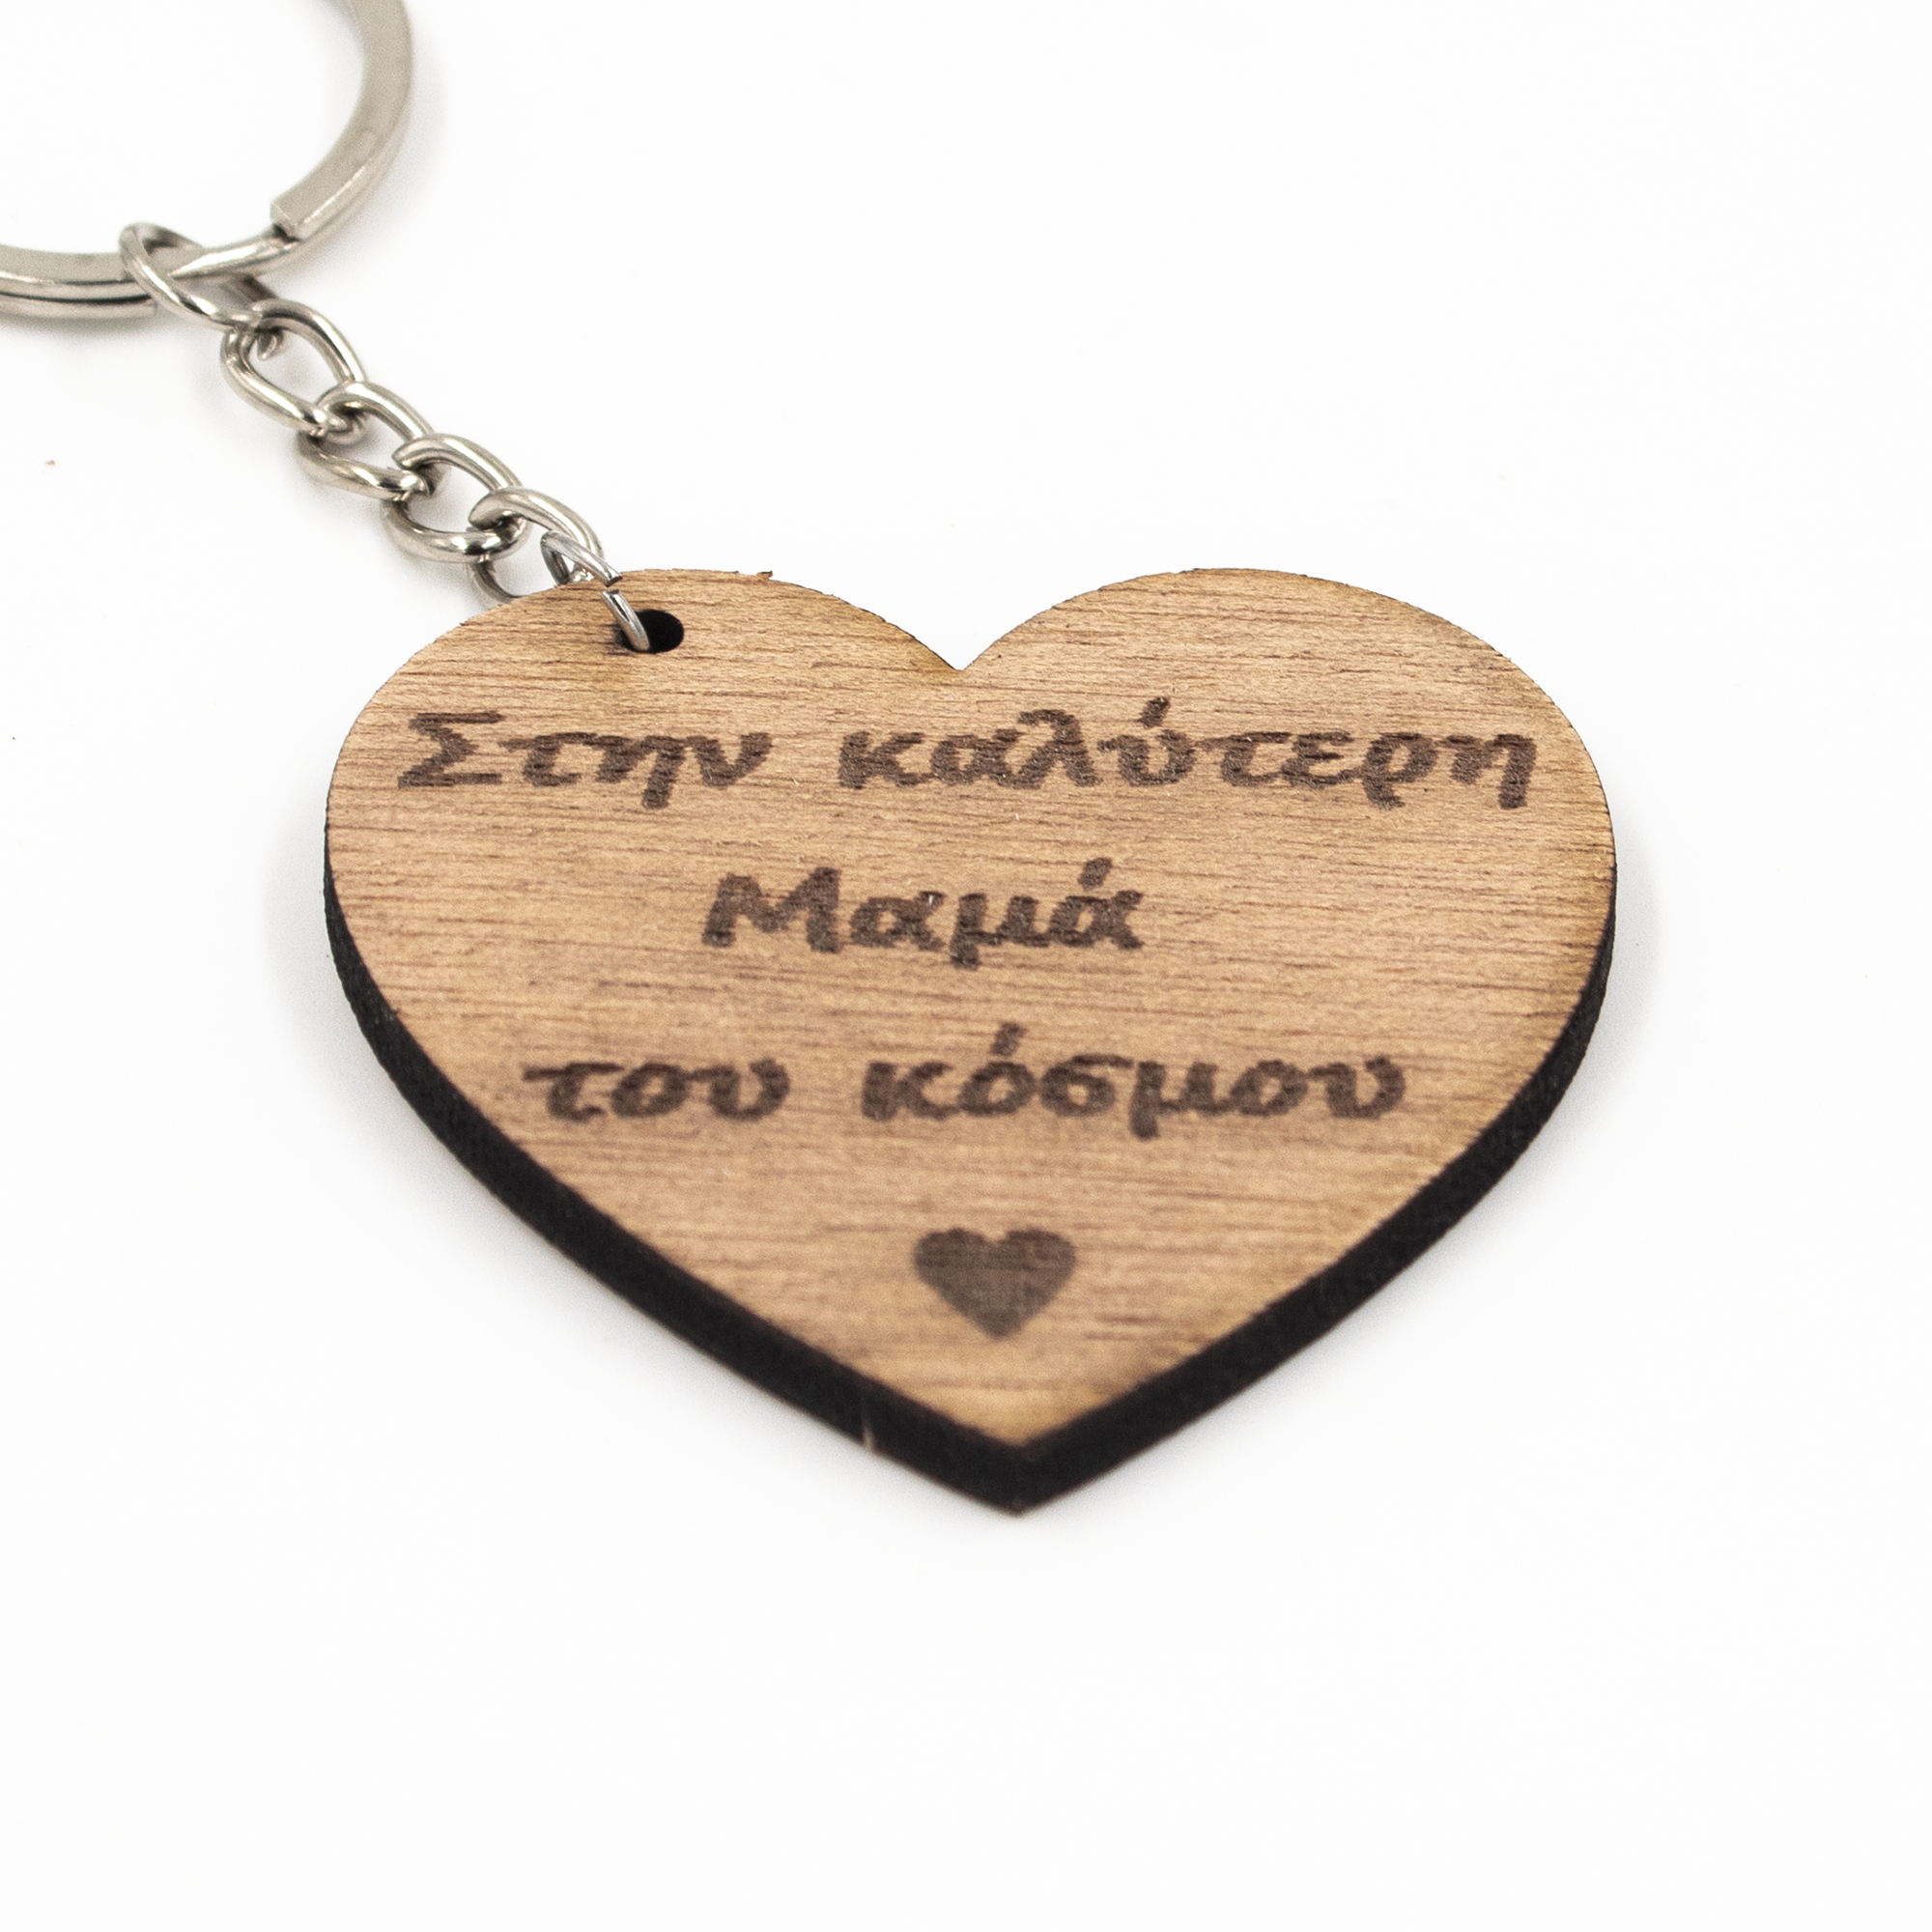 Wooden keyring with 'Best Mom in The World' message, perfect gift for Mother's Day or any occasion. Intricate detailing and made from high-quality materials.